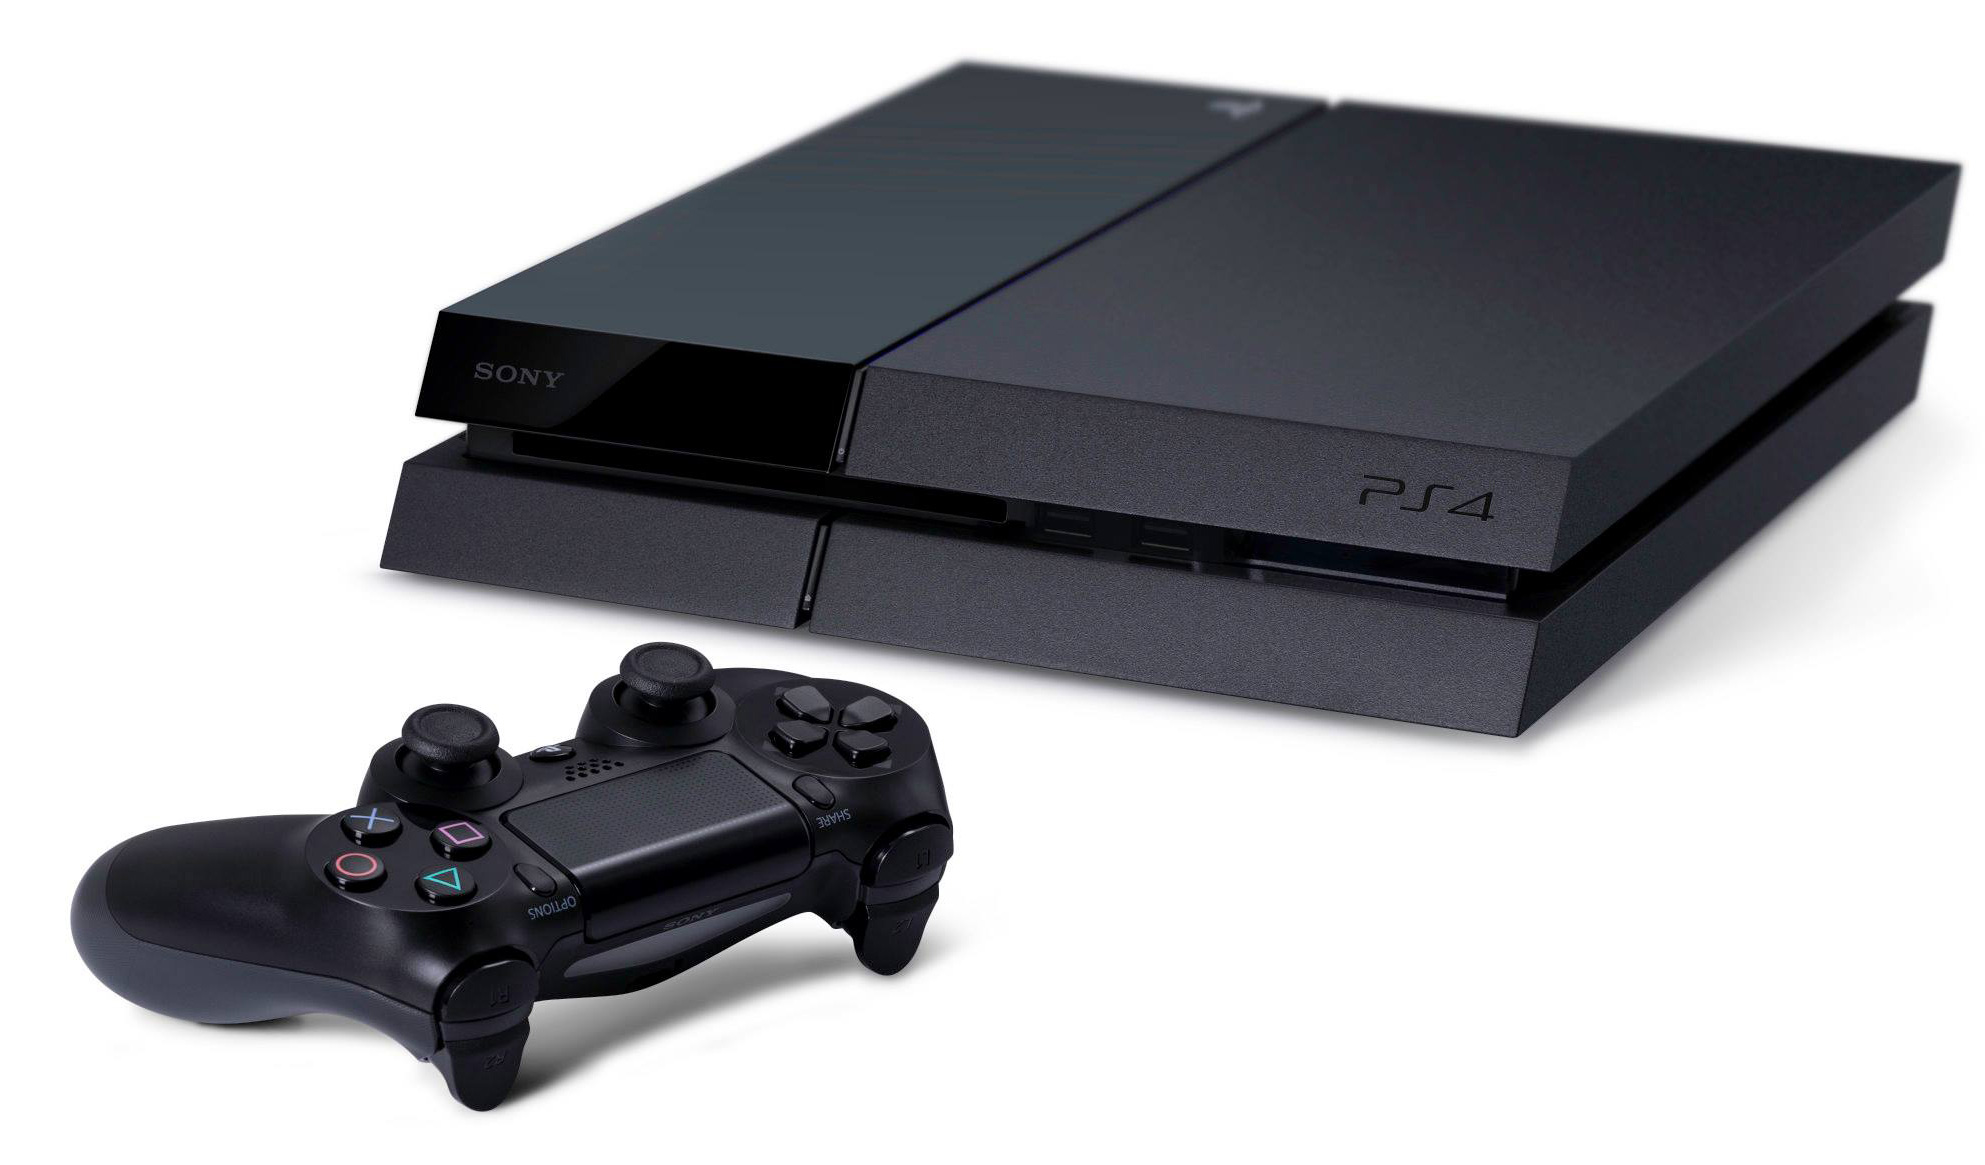 PlayStation Blog Updates PS4 FAQ - Document Includes Official Launch Lineup and System Features